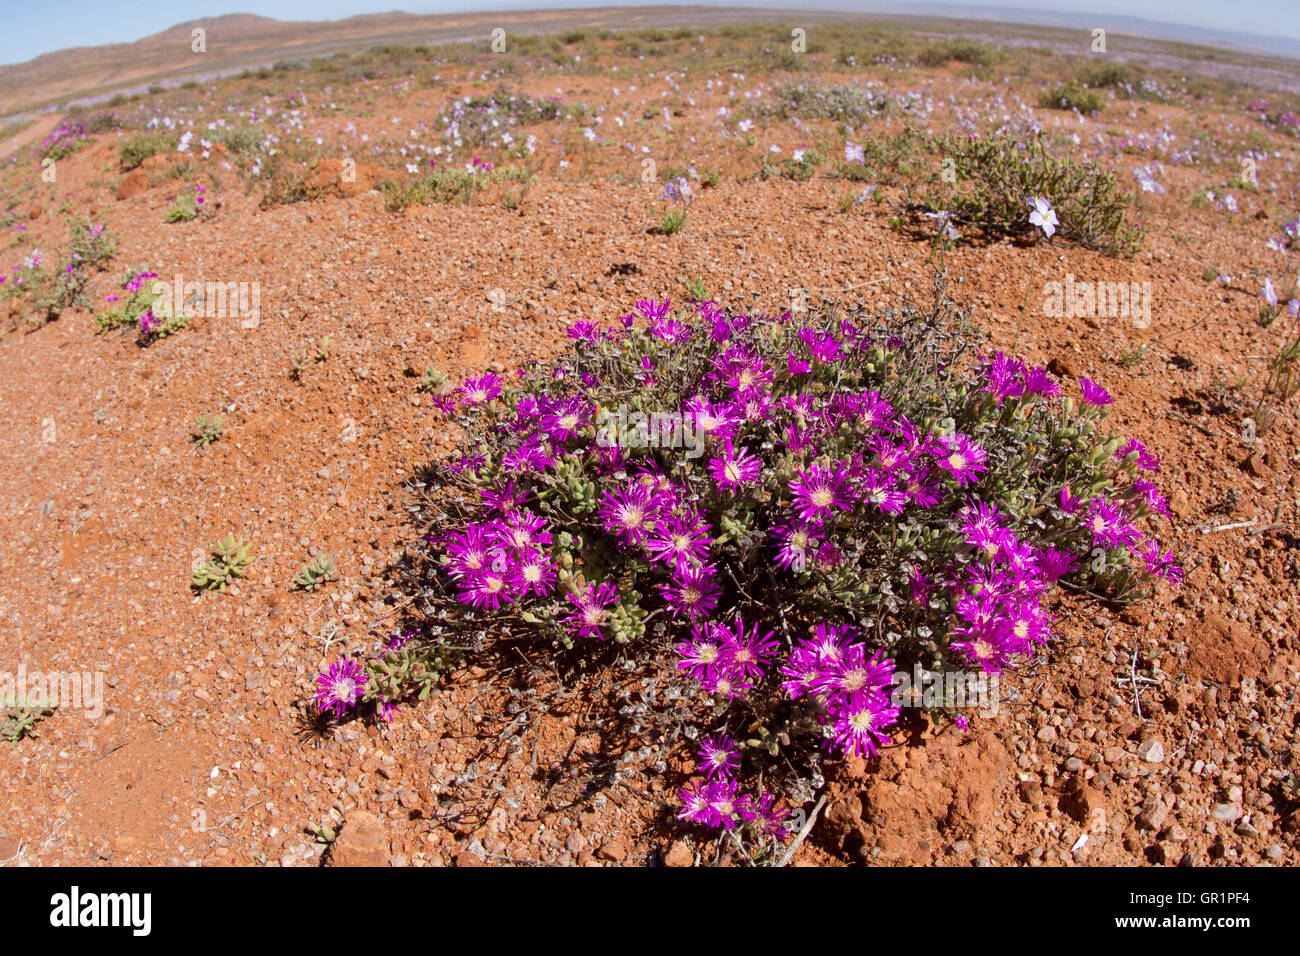 Desert blooms: pink flowers after heavy rainfall in the Karoo desert, Namaqualand, South Africa Stock Photo